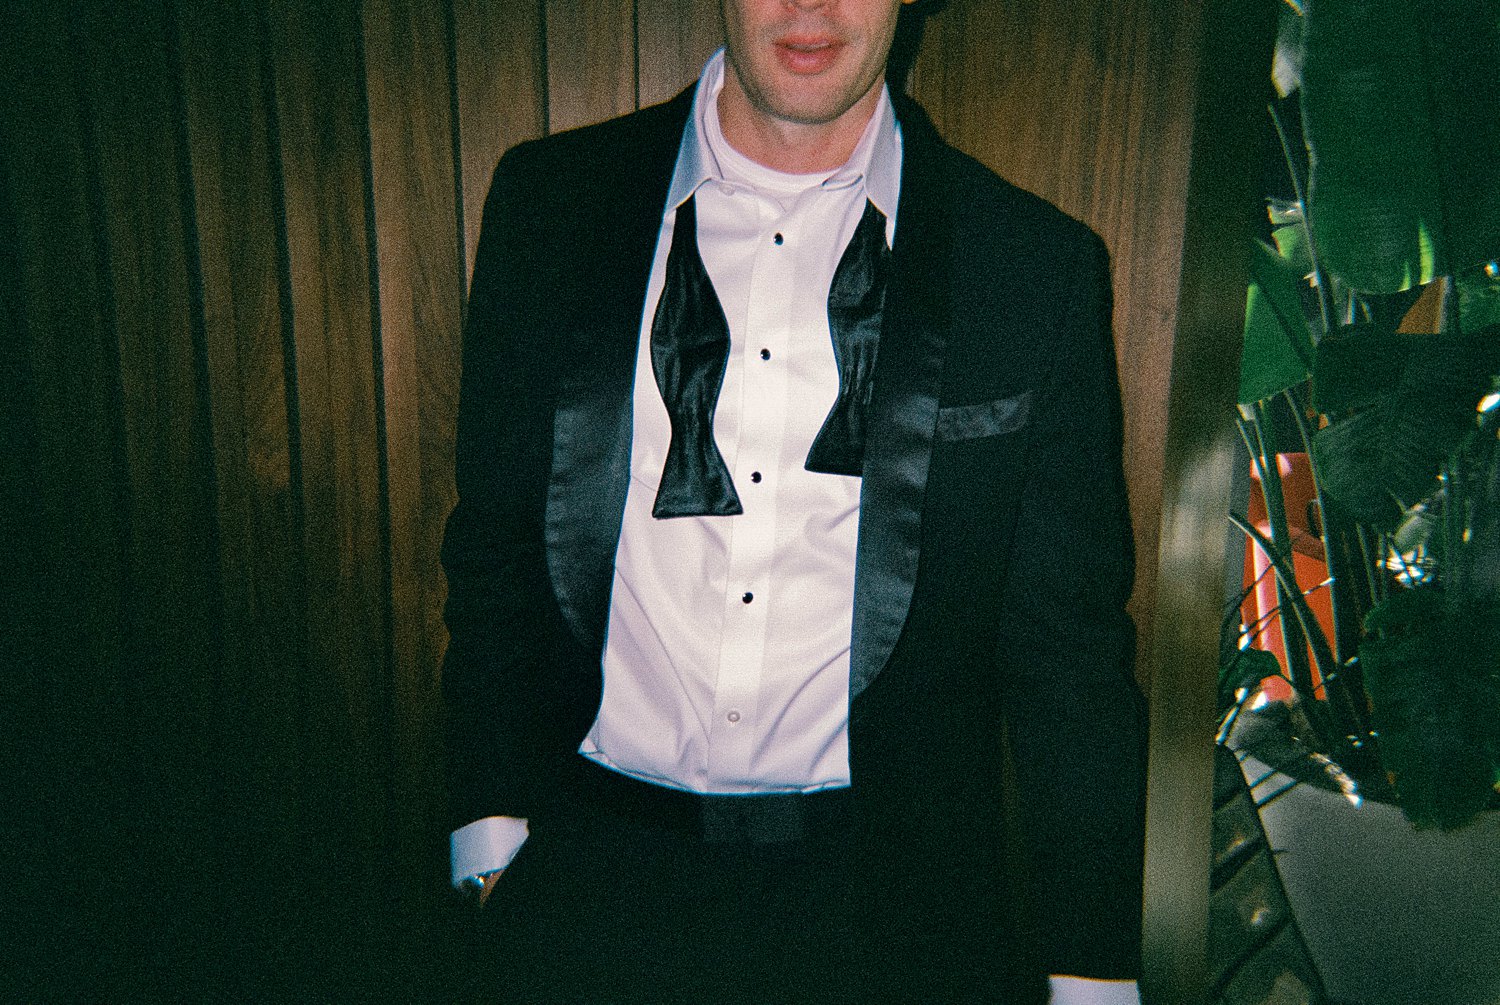 Man in black tuxedo and untied bowtie captured on Disposable Camera